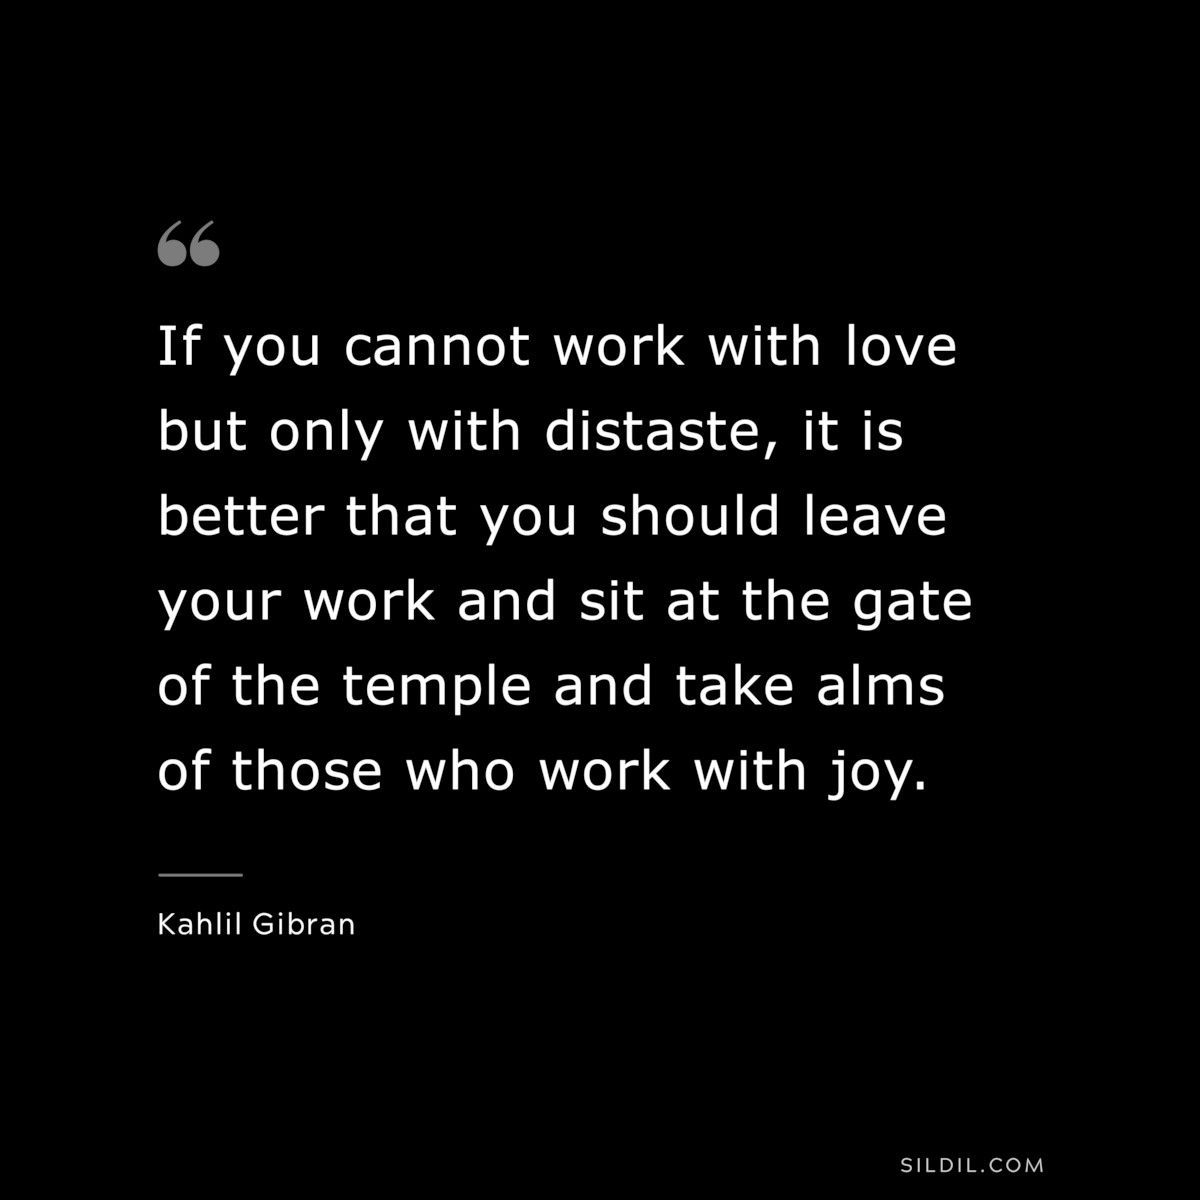 If you cannot work with love but only with distaste, it is better that you should leave your work and sit at the gate of the temple and take alms of those who work with joy. ― Kahlil Gibran